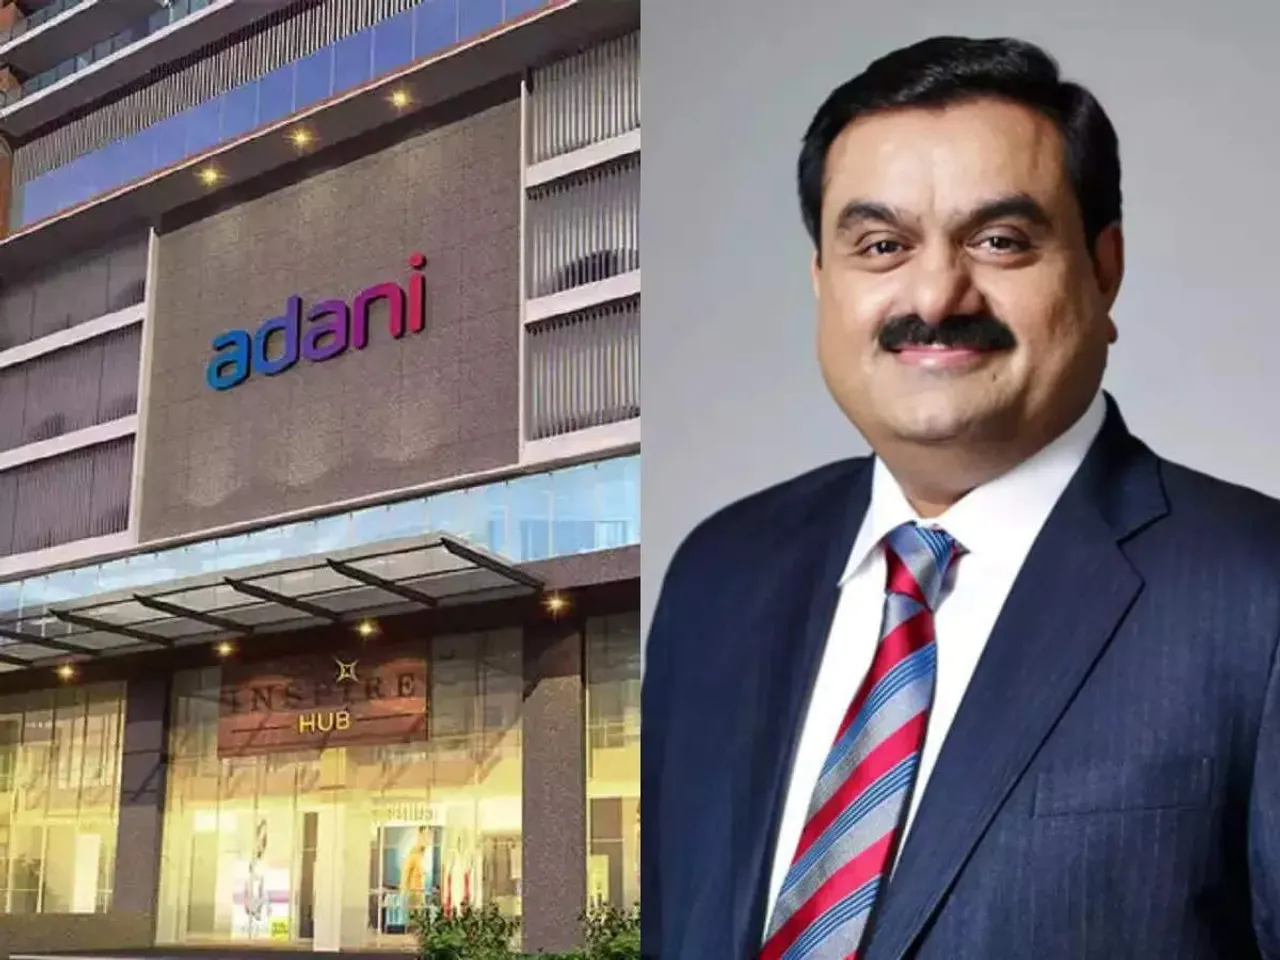 Adani’s market valuation down Rs 4.17 lakh crore on Hindenburg report